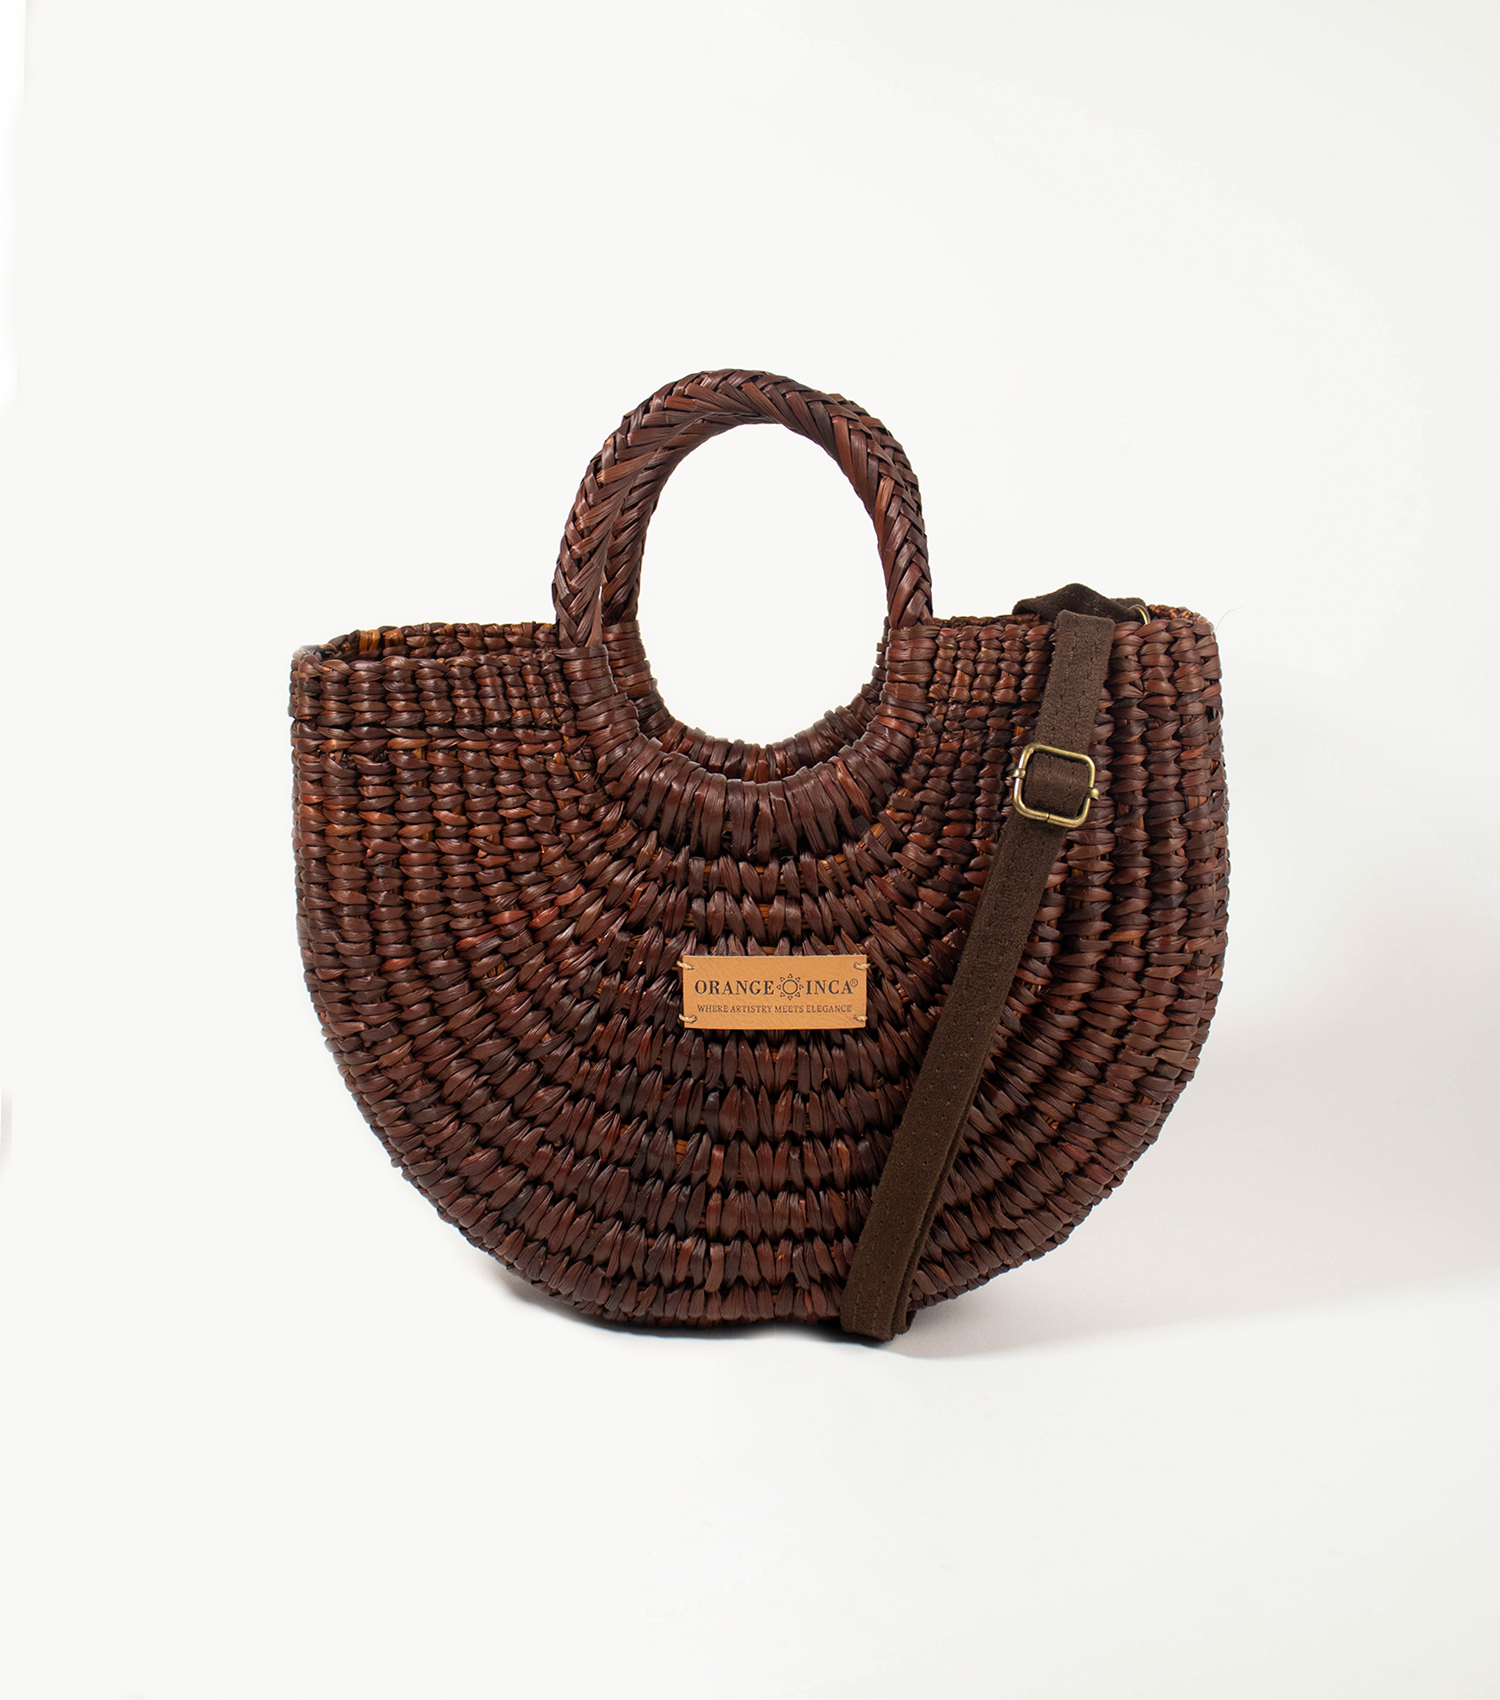 Fiesta front view - Showcases vibrant Brown junco weave with a luxe vegetable leather strap, embodying sophisticated playfulness.